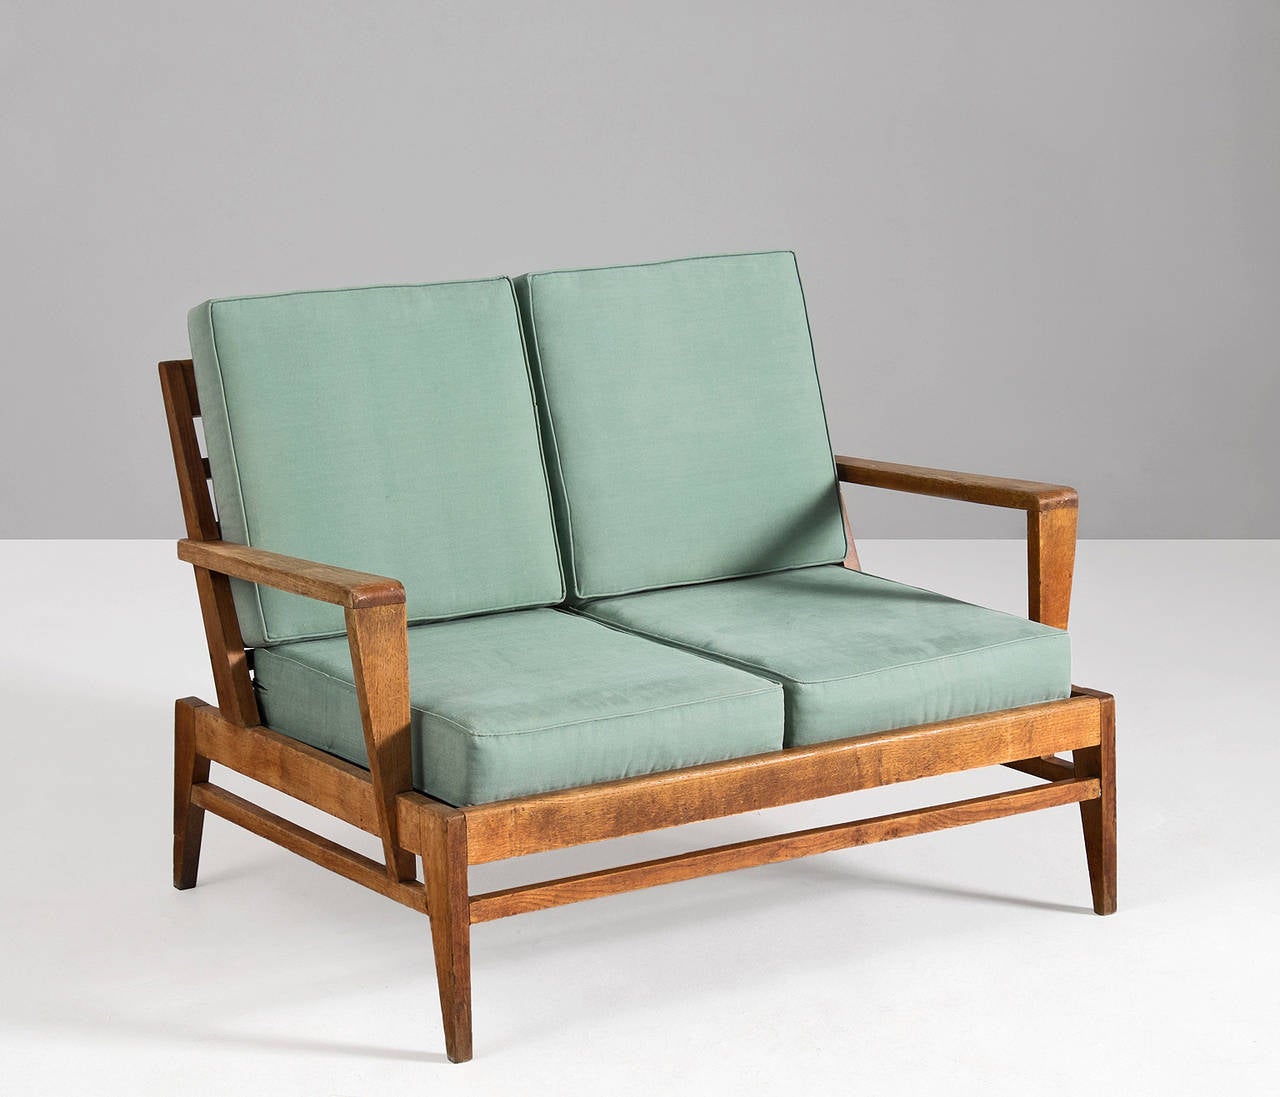 Rene Gabriel,  settee, in oak and fabric, by France 1950s. 

This sofa in oak is known for its solid yet elegant design focused on form and striking appeal. Currently upholstered in original light green fabric, reupholstery is advised. This is